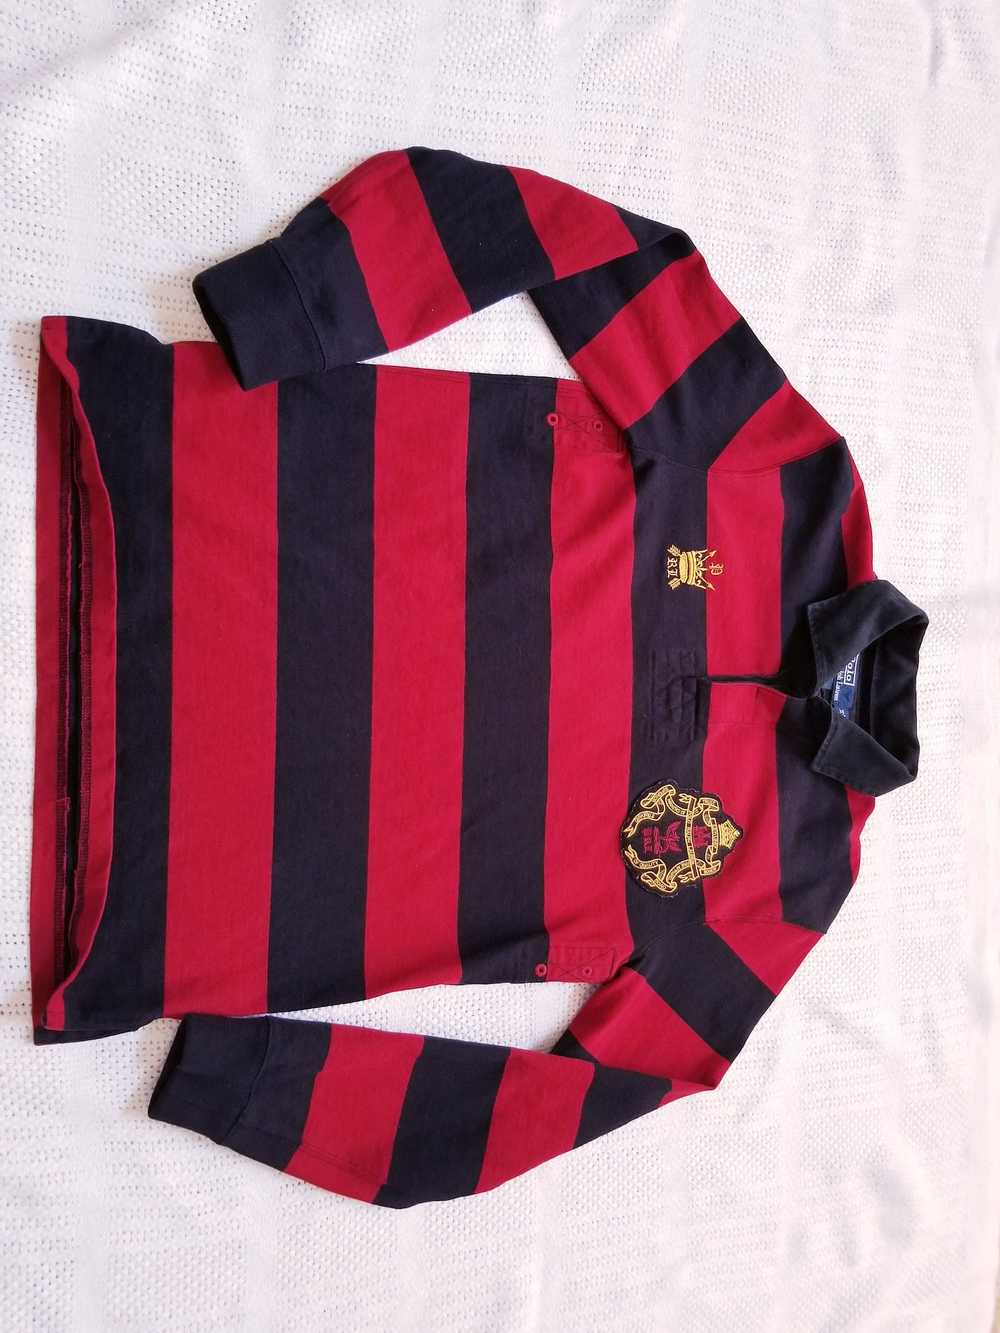 Polo Ralph Lauren rugby #5 patch vintage - image 6